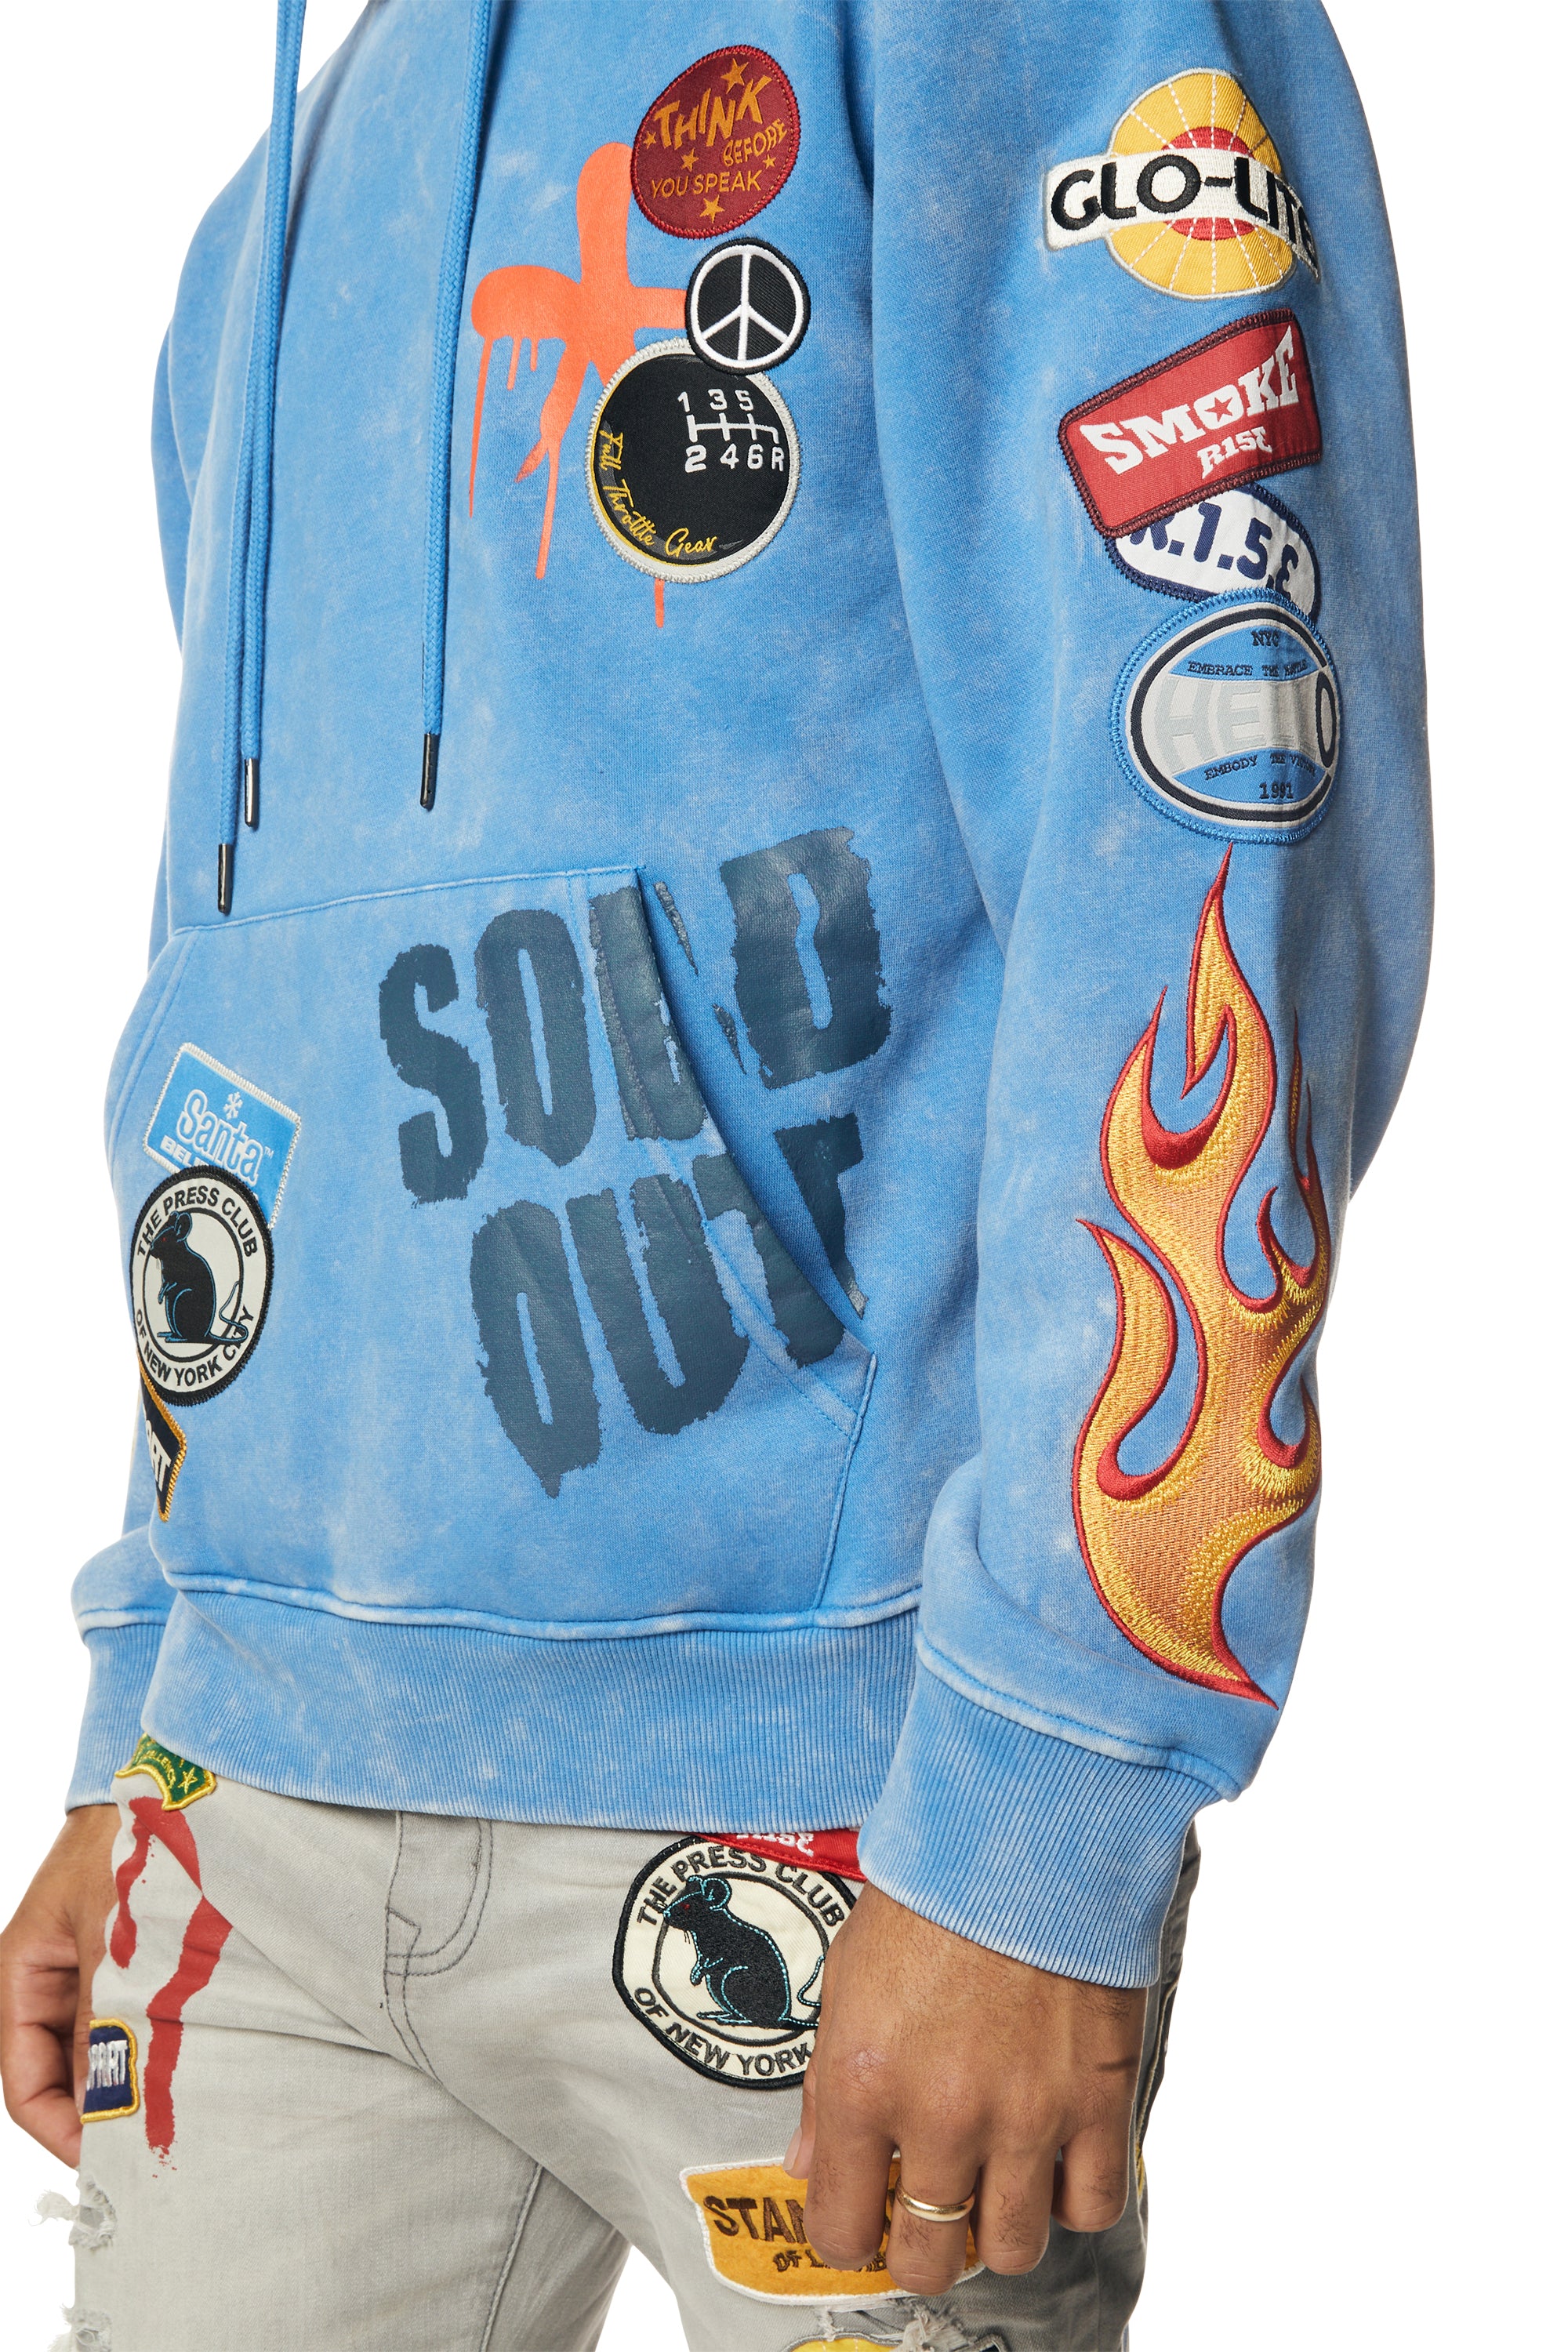 Multi Embroidered Patched Enzyme Washed Hoodie - Blue